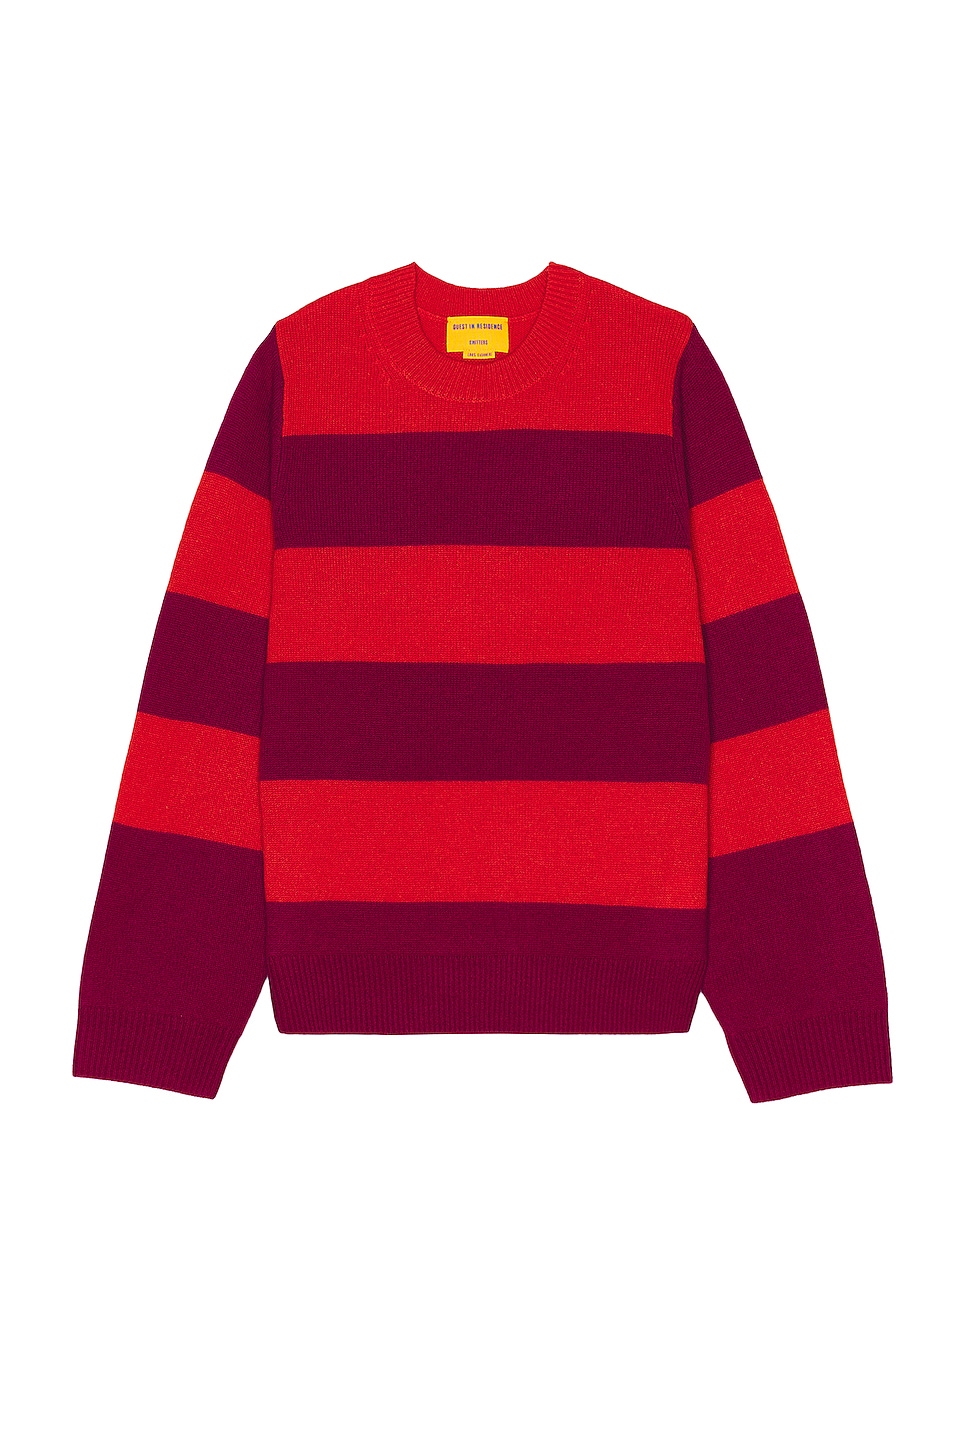 Image 1 of Guest In Residence Stripe Crew in Magenta & Cherry